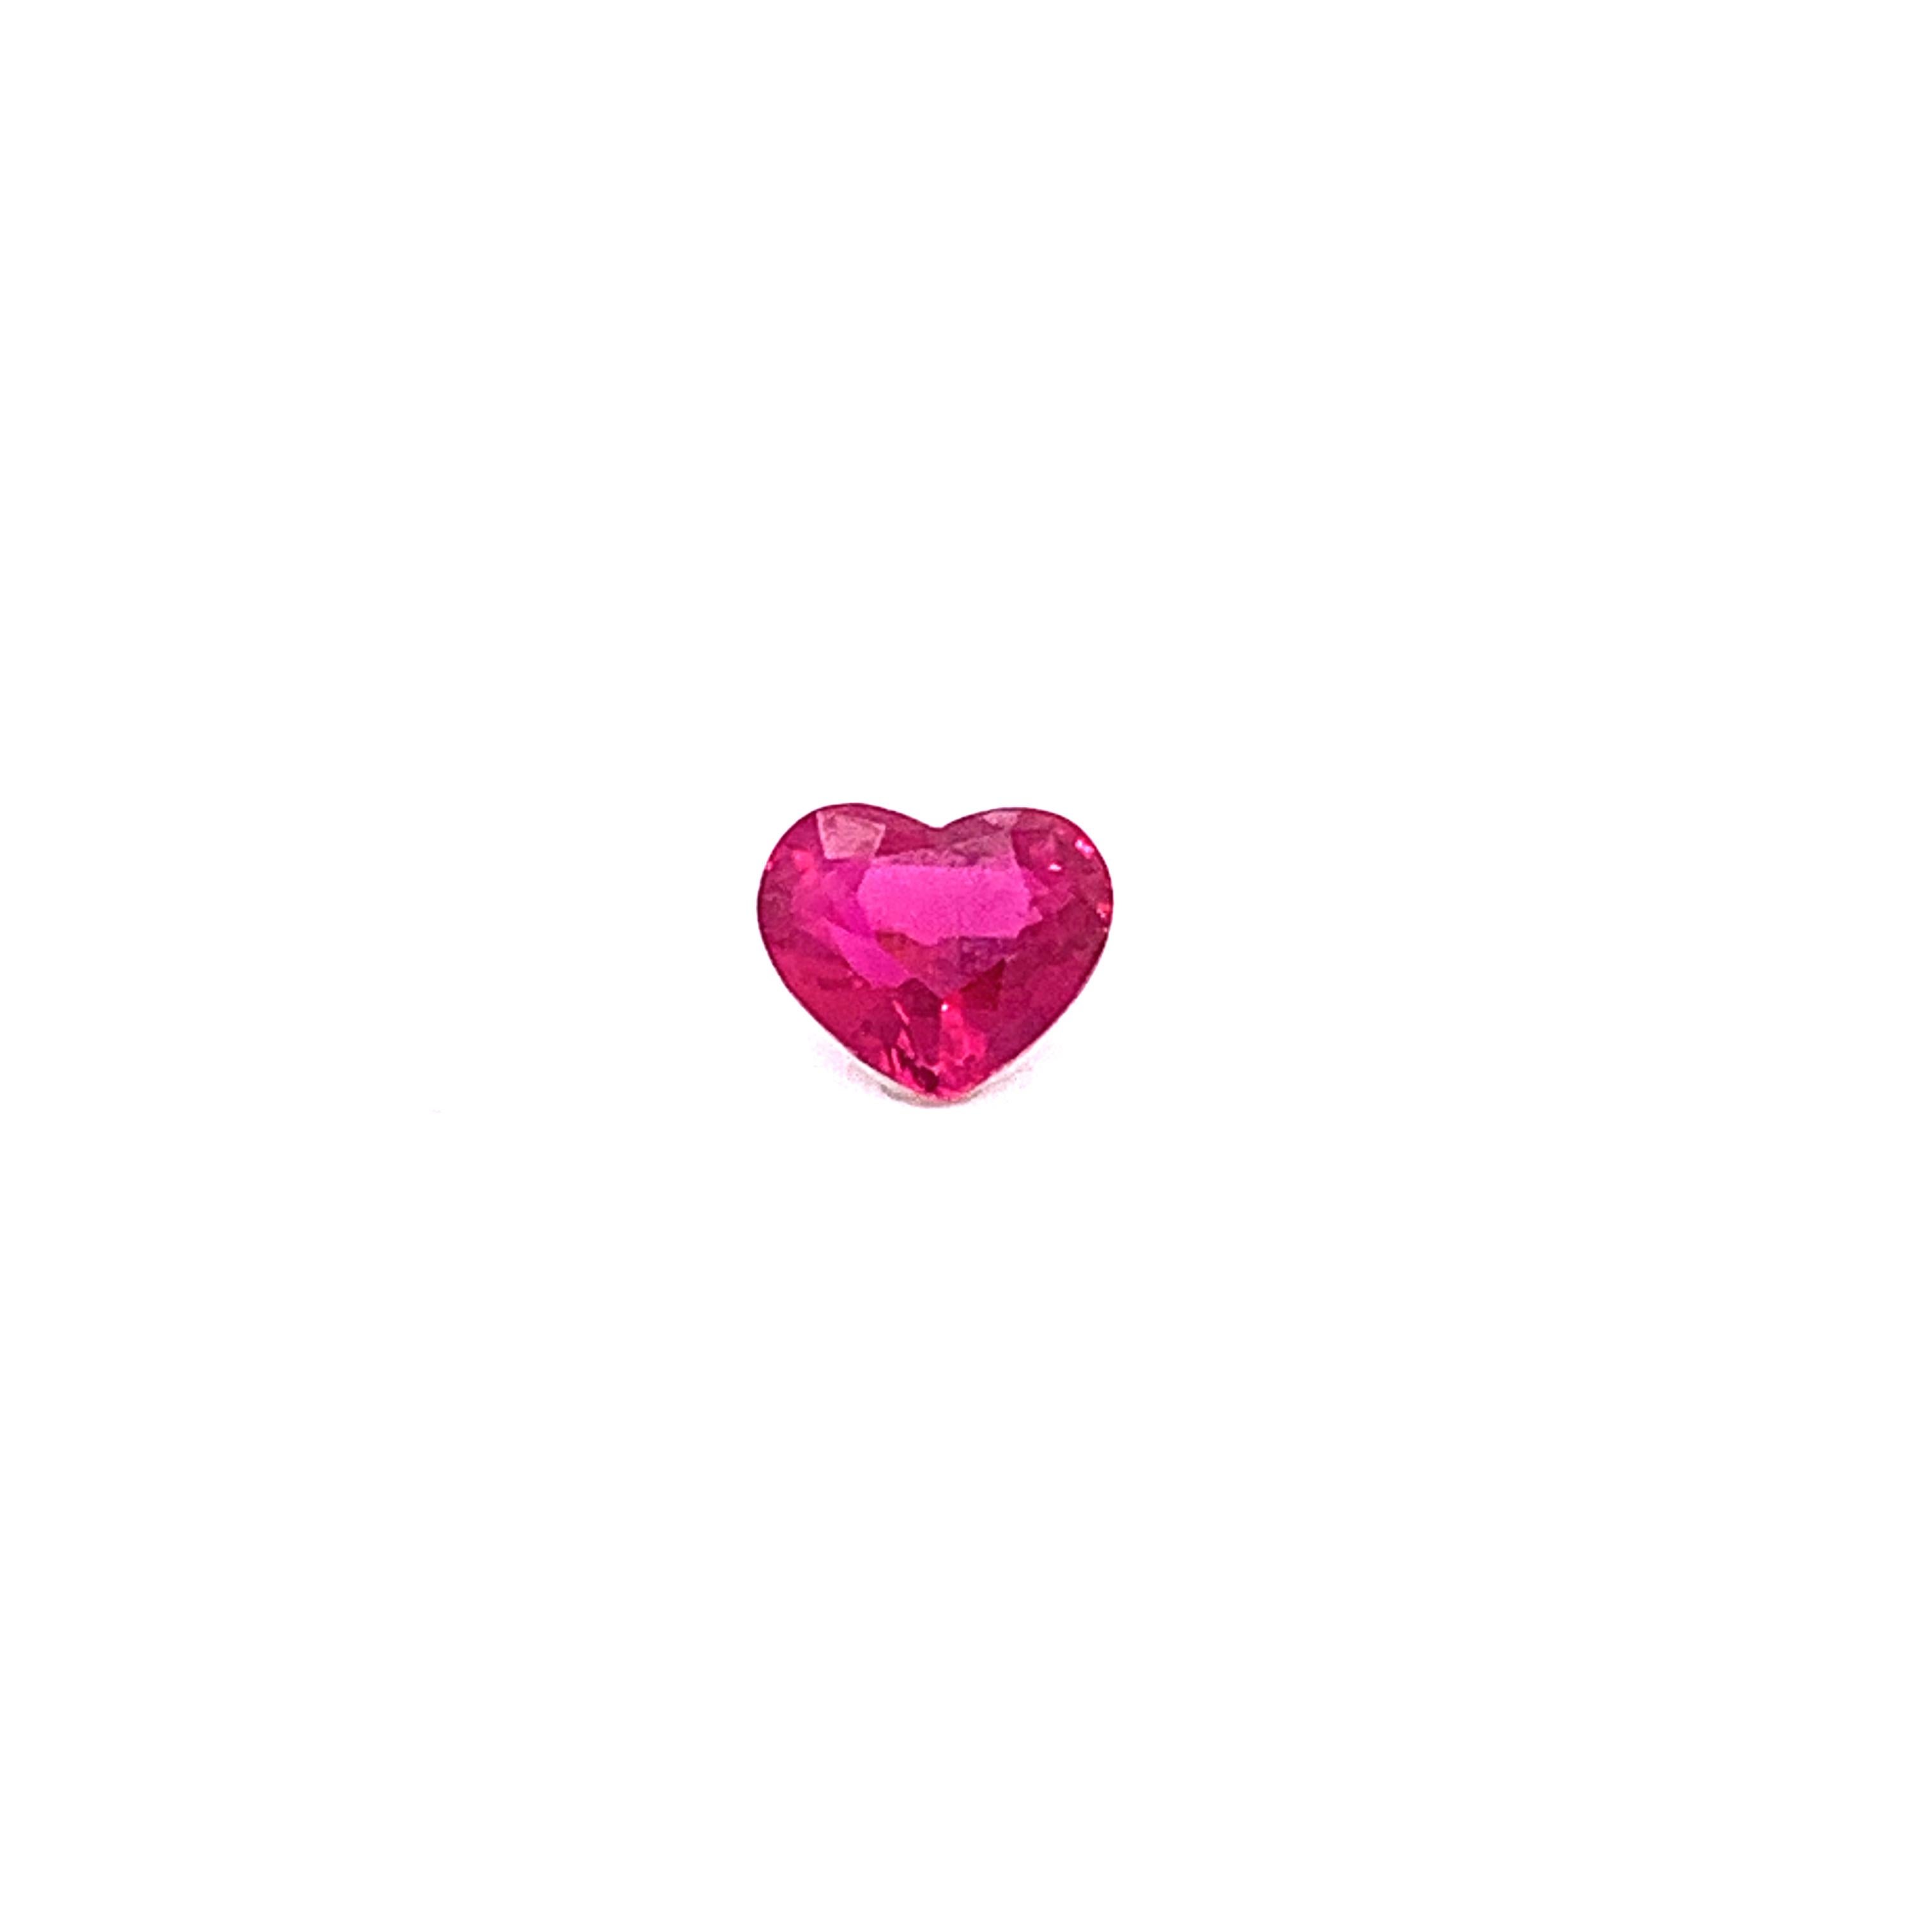 Modern 1.27 Carat Heart-Shaped Mozambique No Heat Ruby For Sale